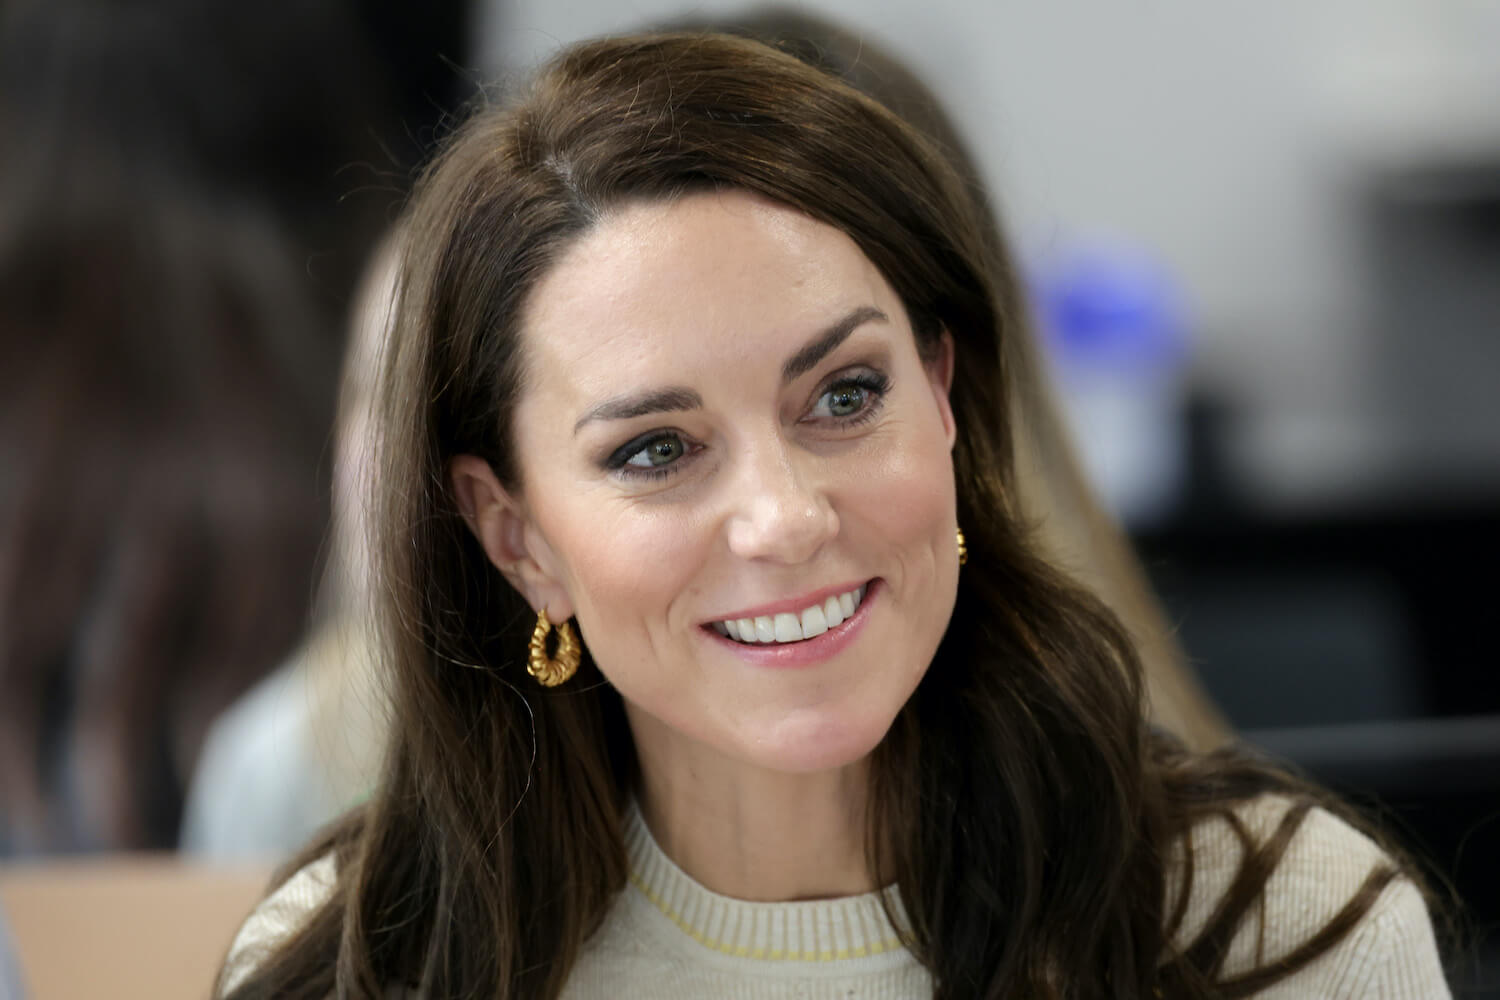 Kate Middleton Is Less Formal When She’s Not With Prince William, Speech Expert Says